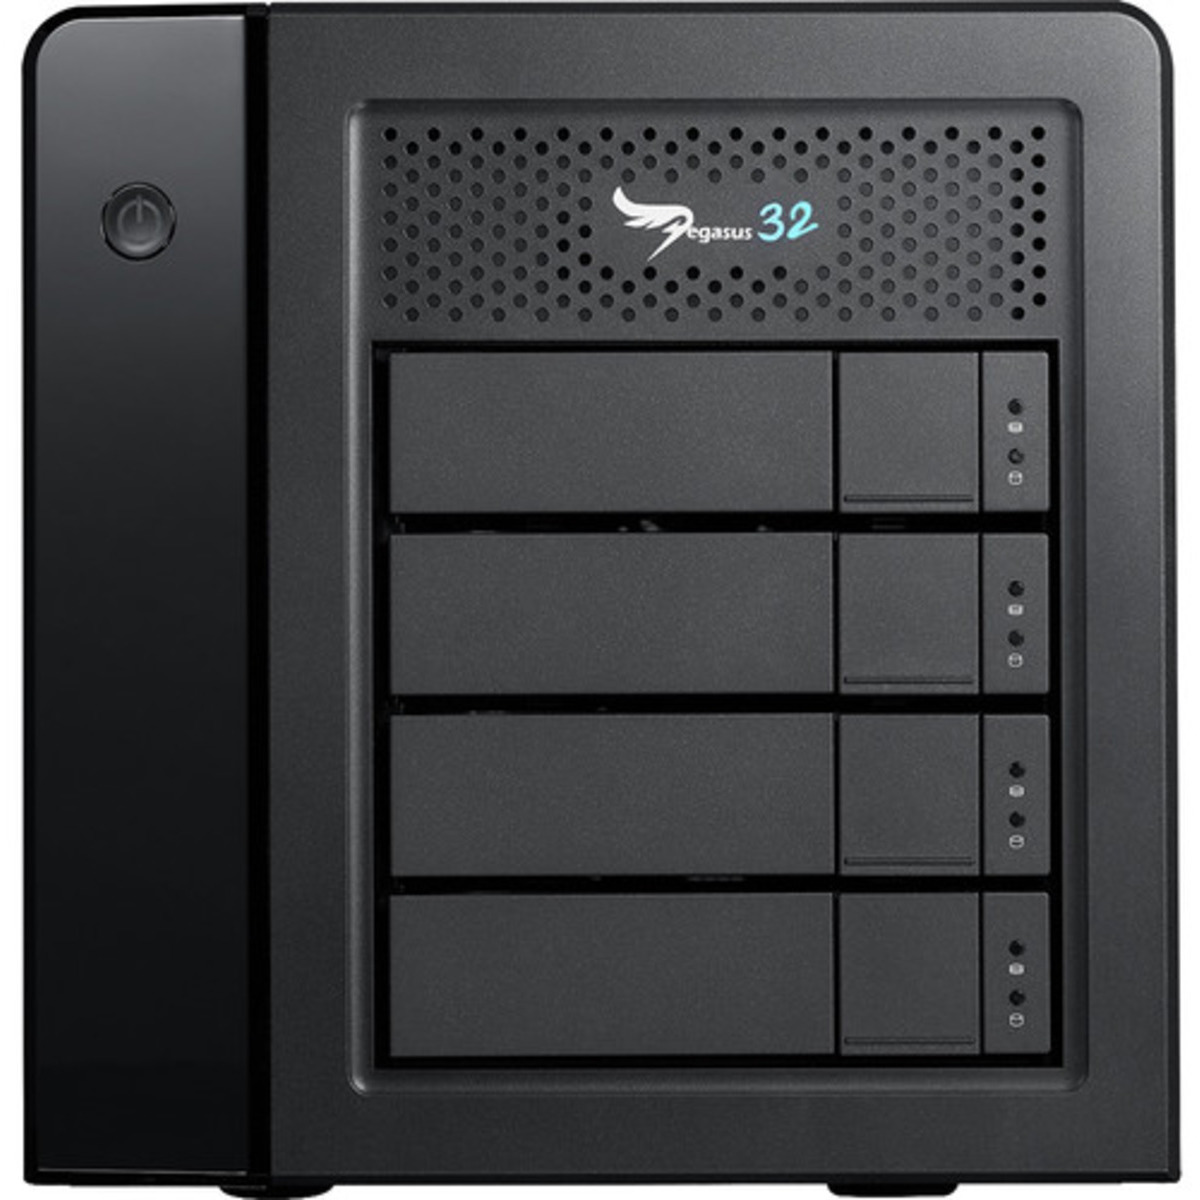 Promise Technology Pegasus32 R4 Thunderbolt 3 72tb 4-Bay Desktop Multimedia / Power User / Business DAS - Direct Attached Storage Device 4x18tb Seagate IronWolf Pro ST18000NT001 3.5 7200rpm SATA 6Gb/s HDD NAS Class Drives Installed - Burn-In Tested Pegasus32 R4 Thunderbolt 3